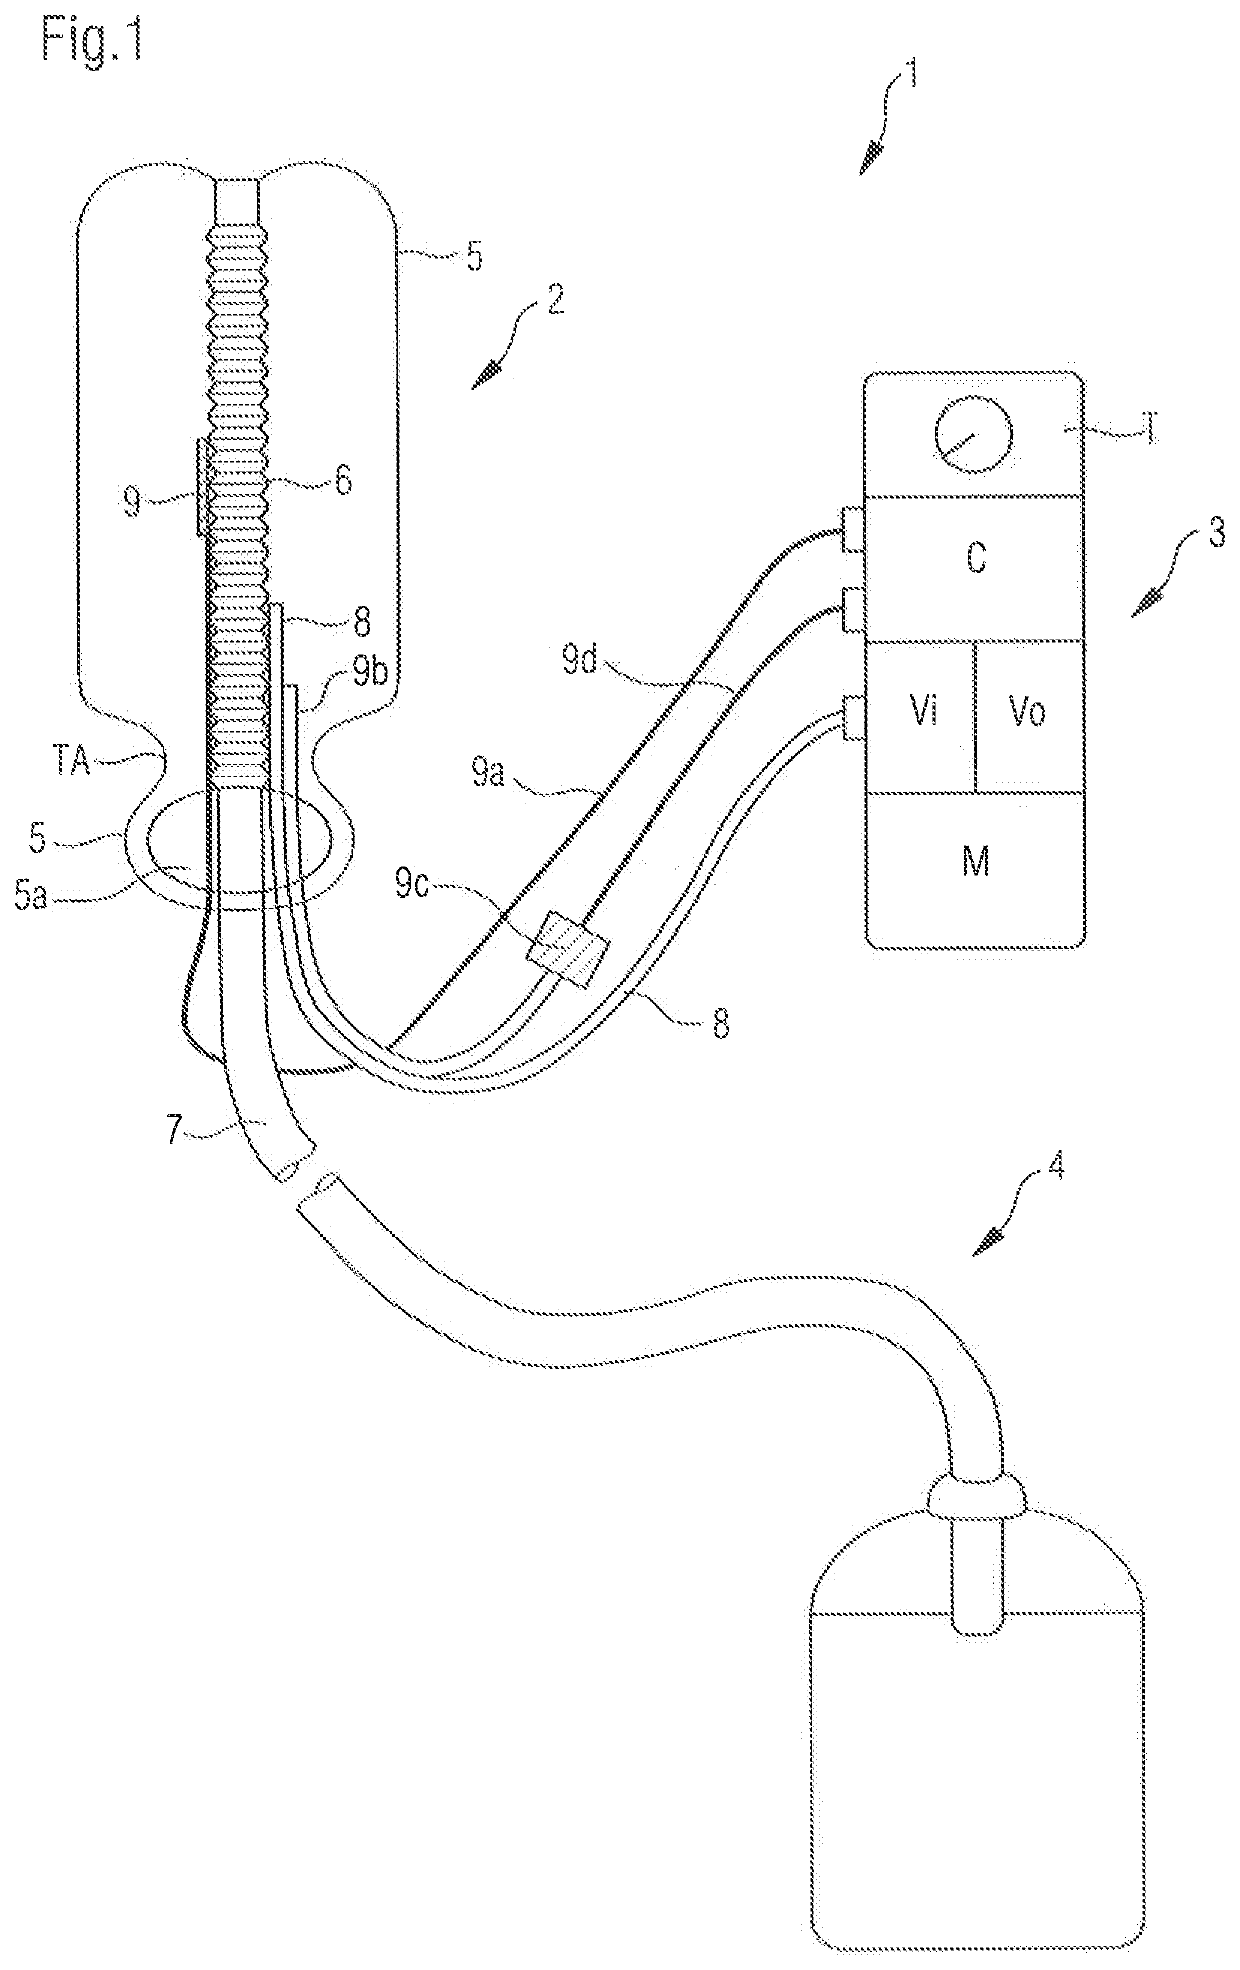 Device for tamponade sealing protection of surgical sutures and wounds, in particular of end-to-end anastomoses of the rectum